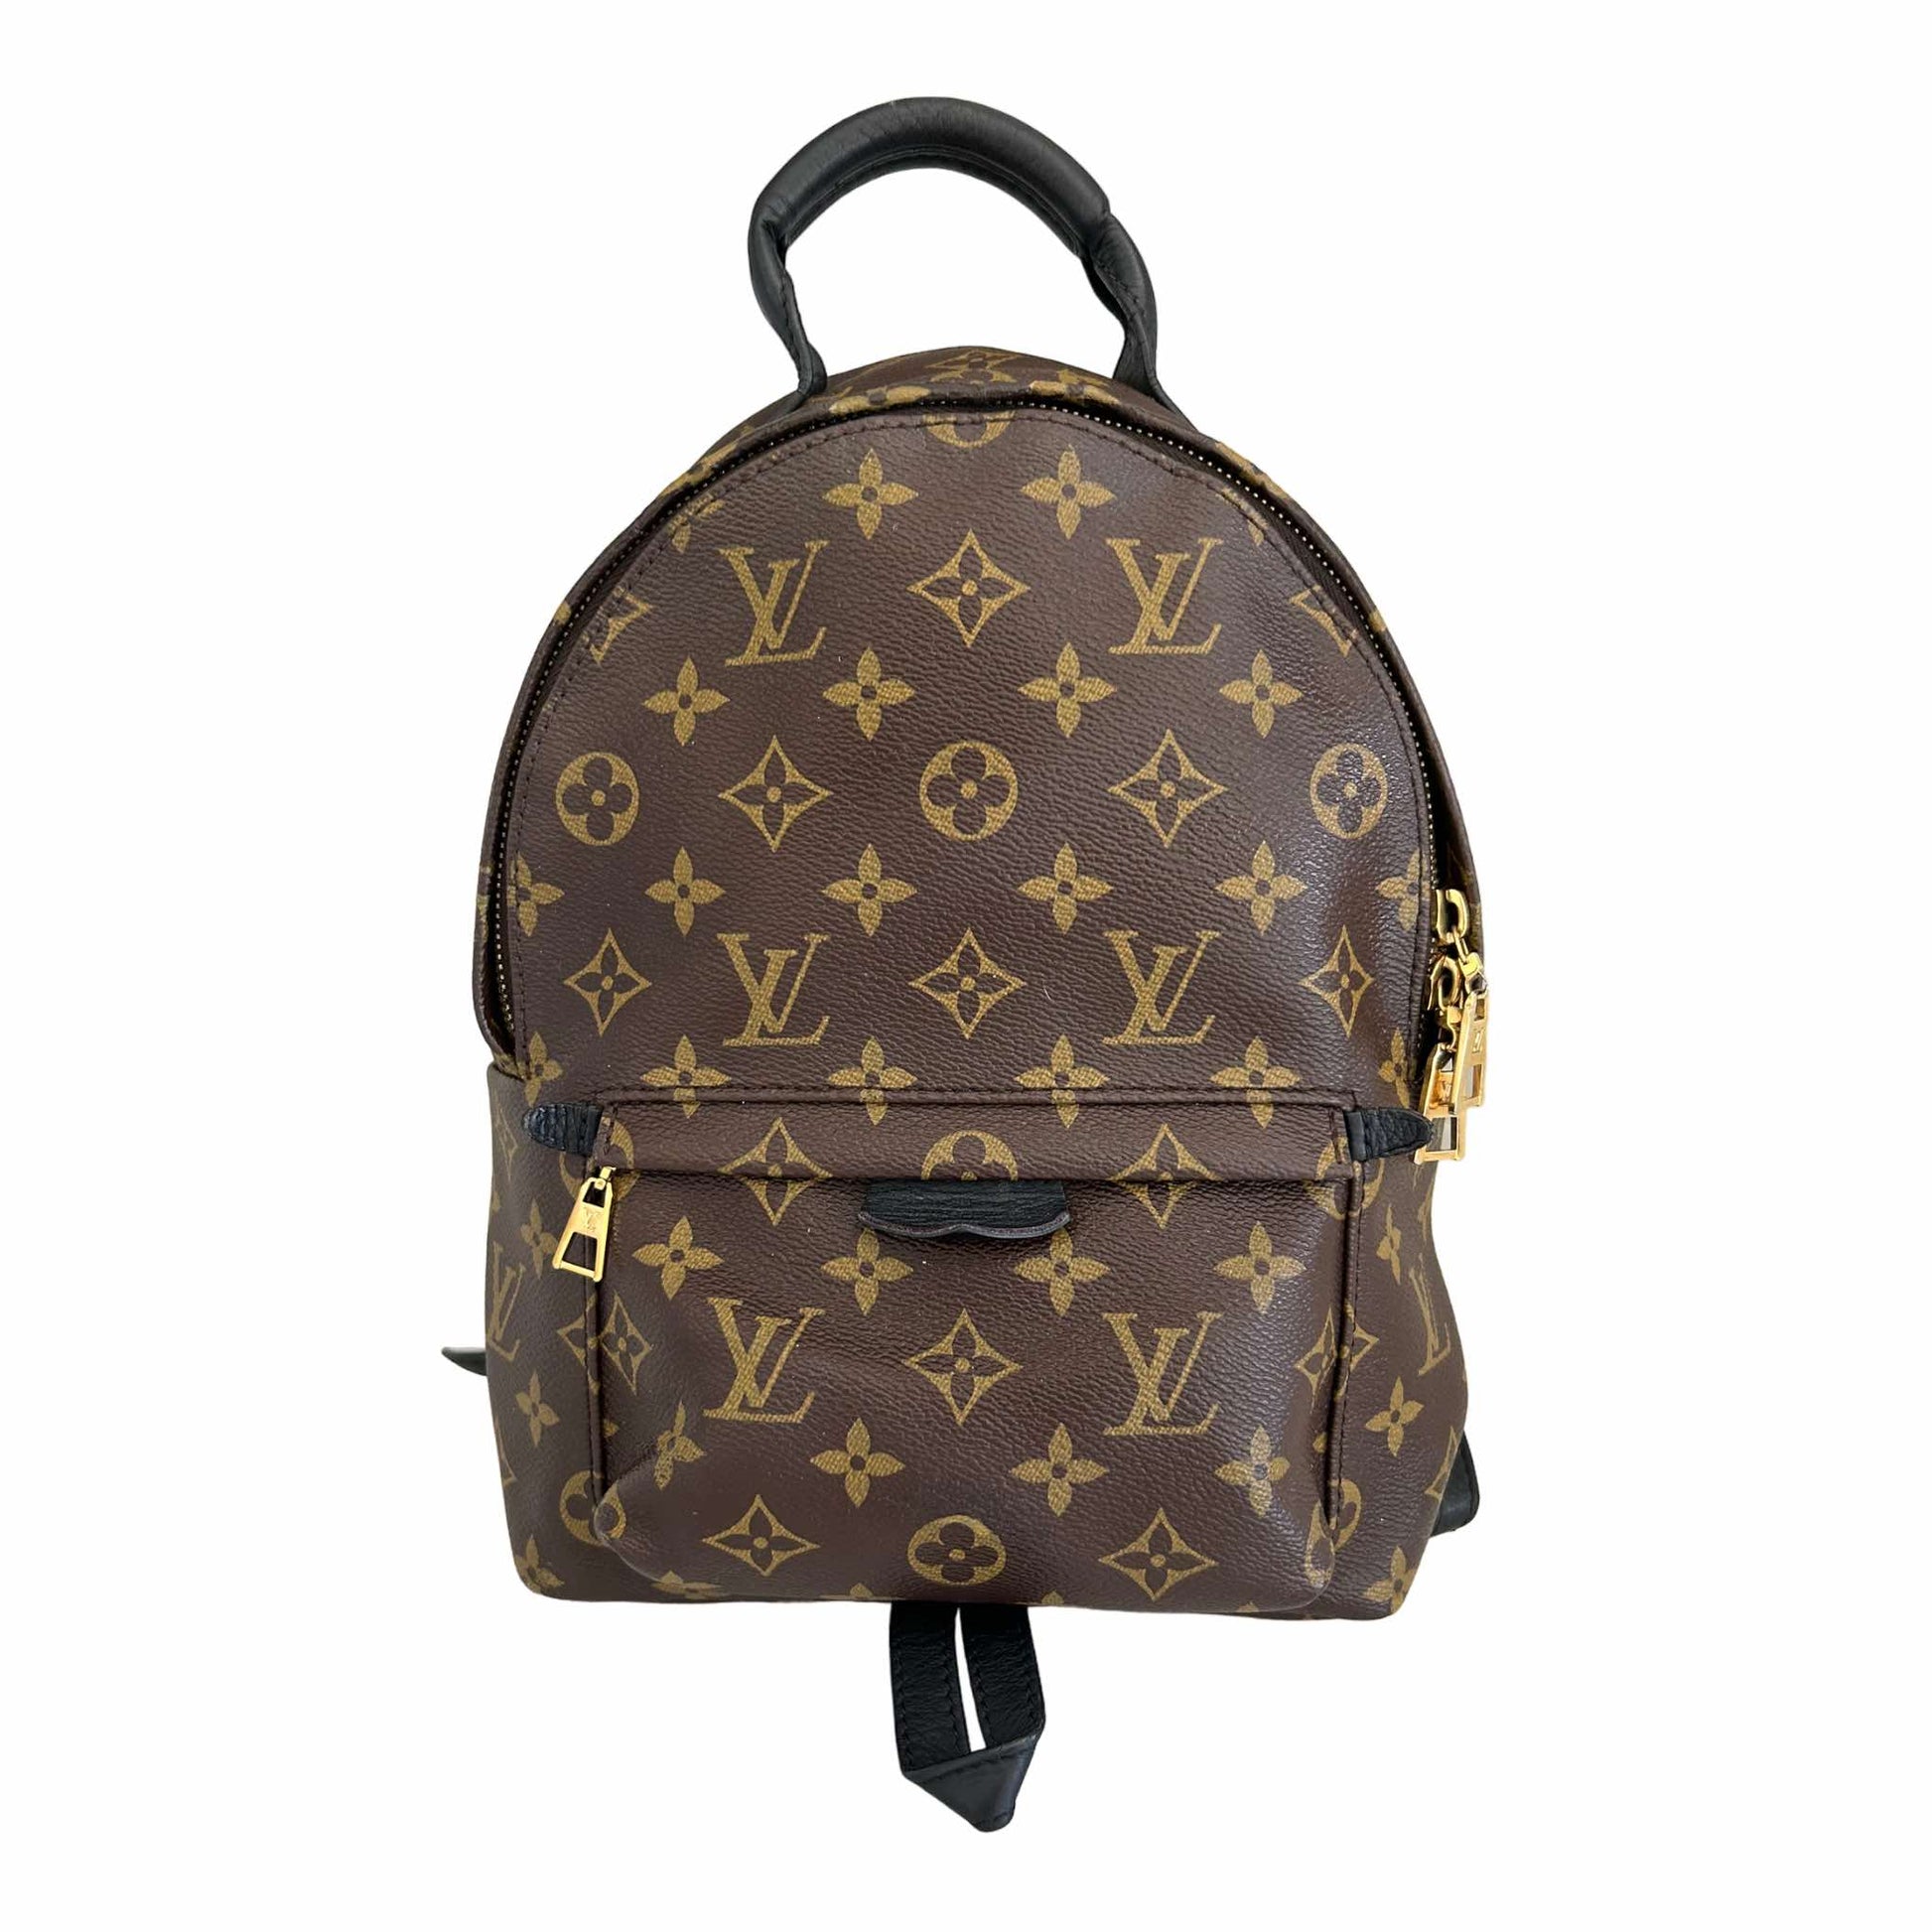 LOUIS VUITTON Monogram Palm Springs Backpack PM M44871 Backpack